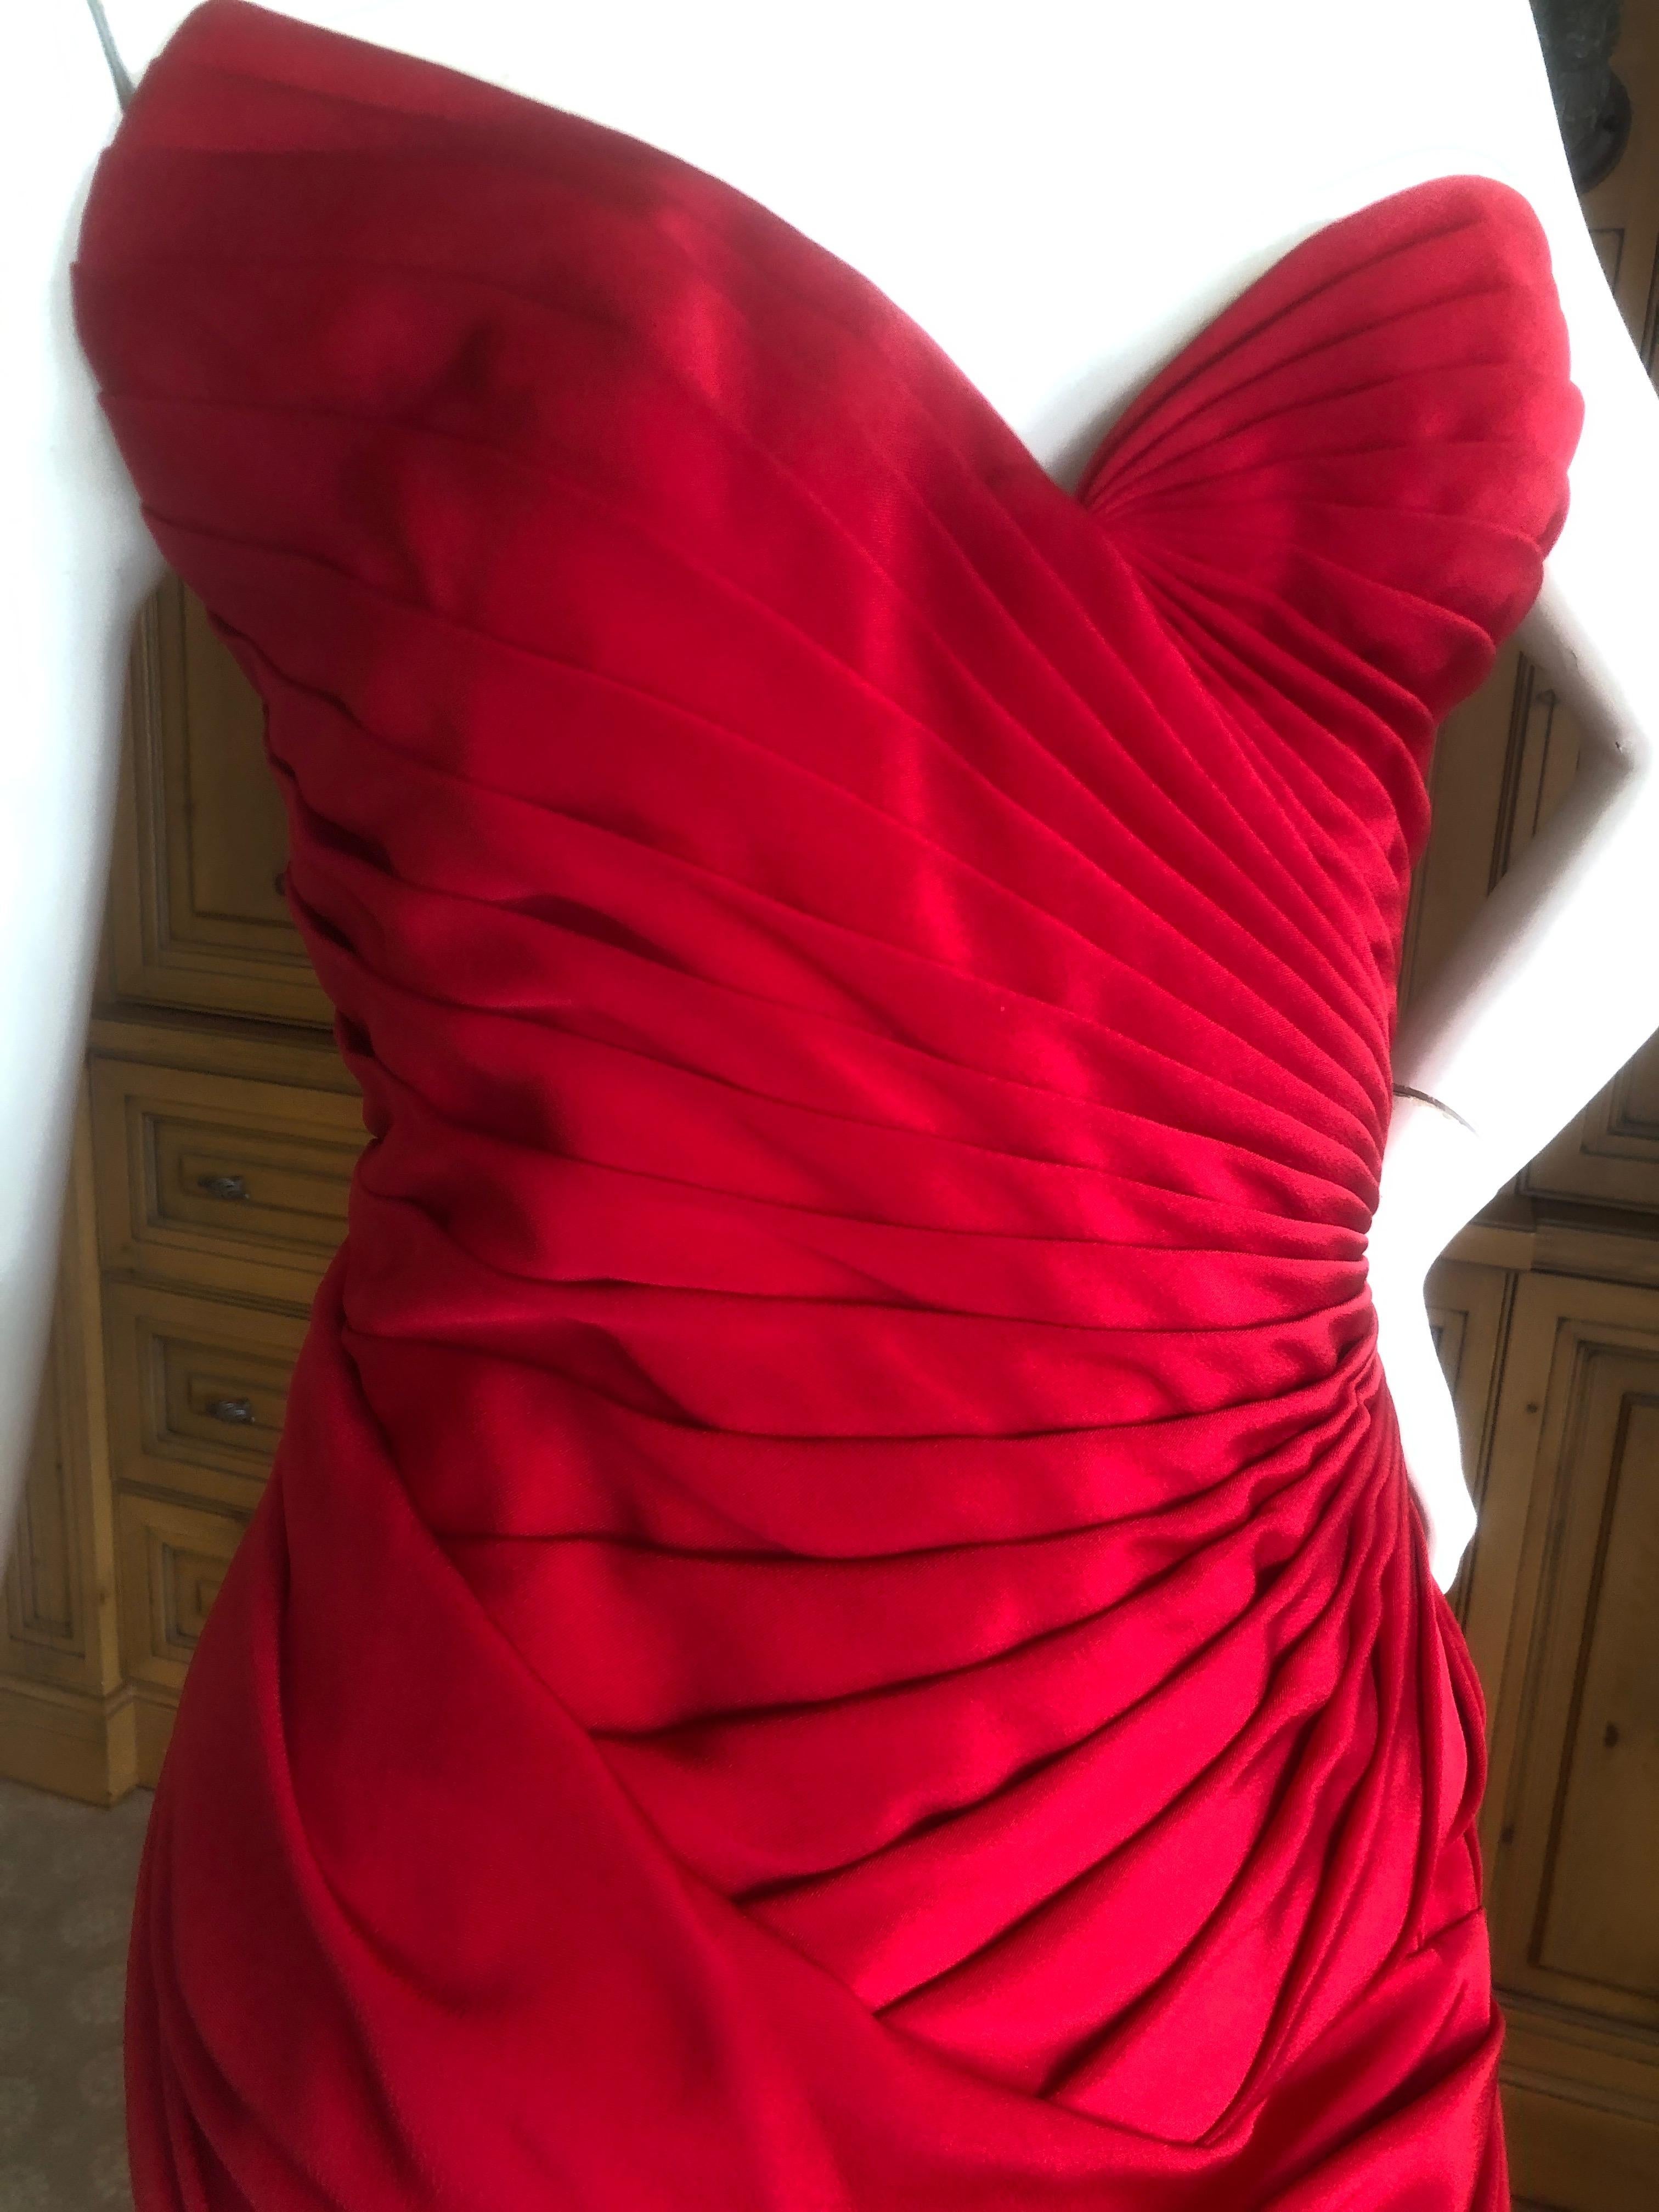 Emanuel Ungaro Numbered Haute Couture Fall 1984 Red  Strapless Evening Dress 5